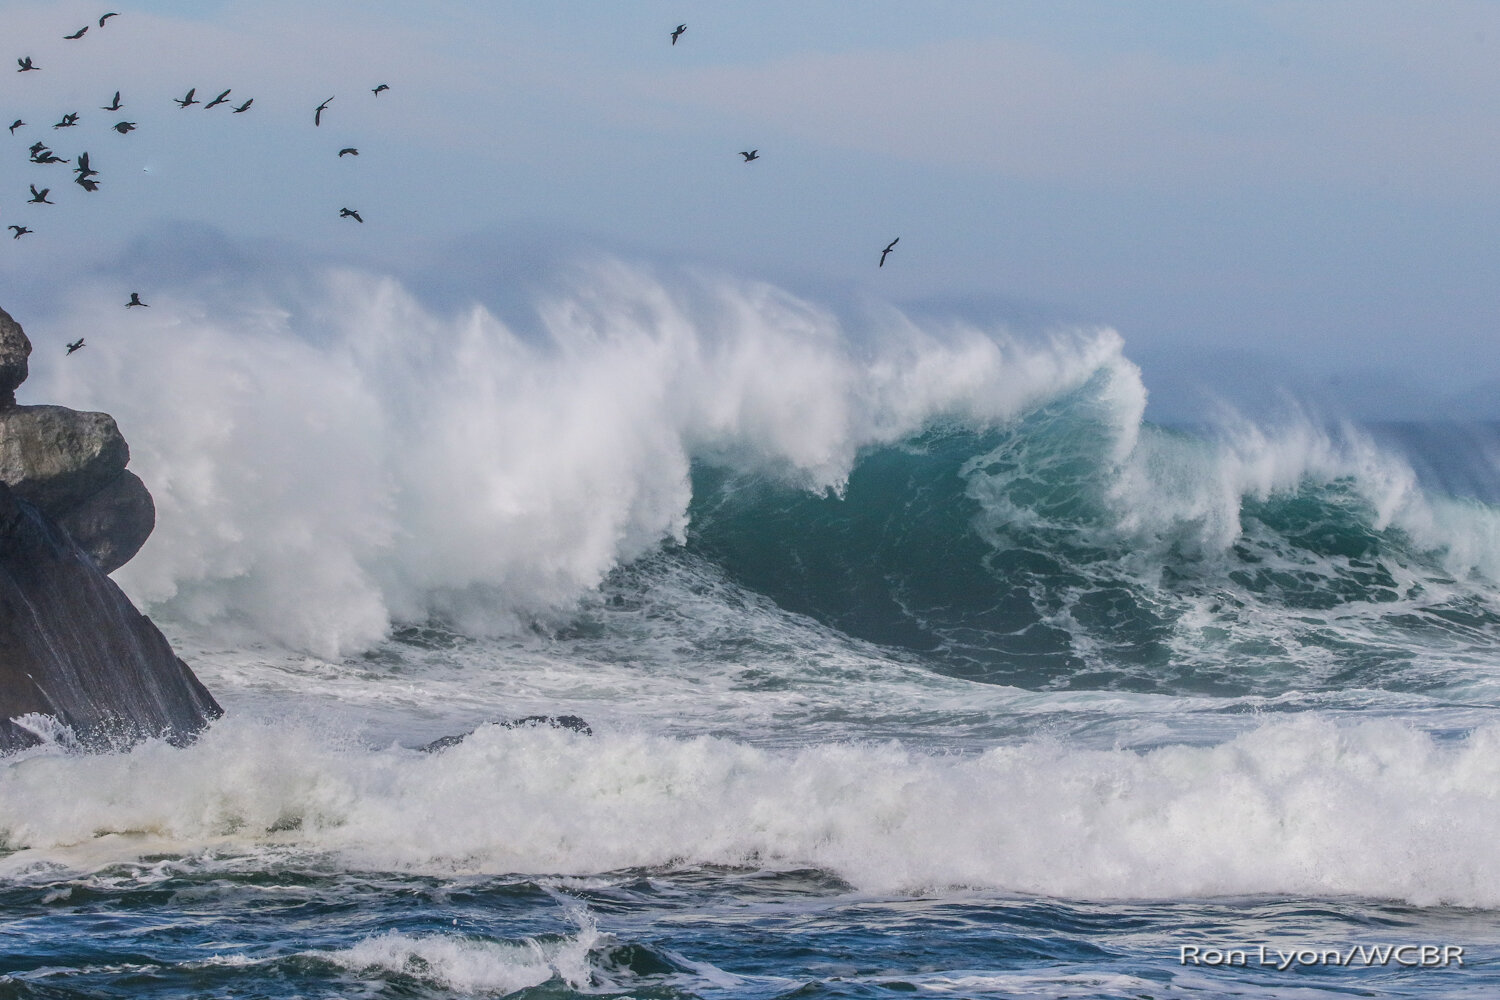 Waves of consequence at Morro Rock on Saturday 1/25/20